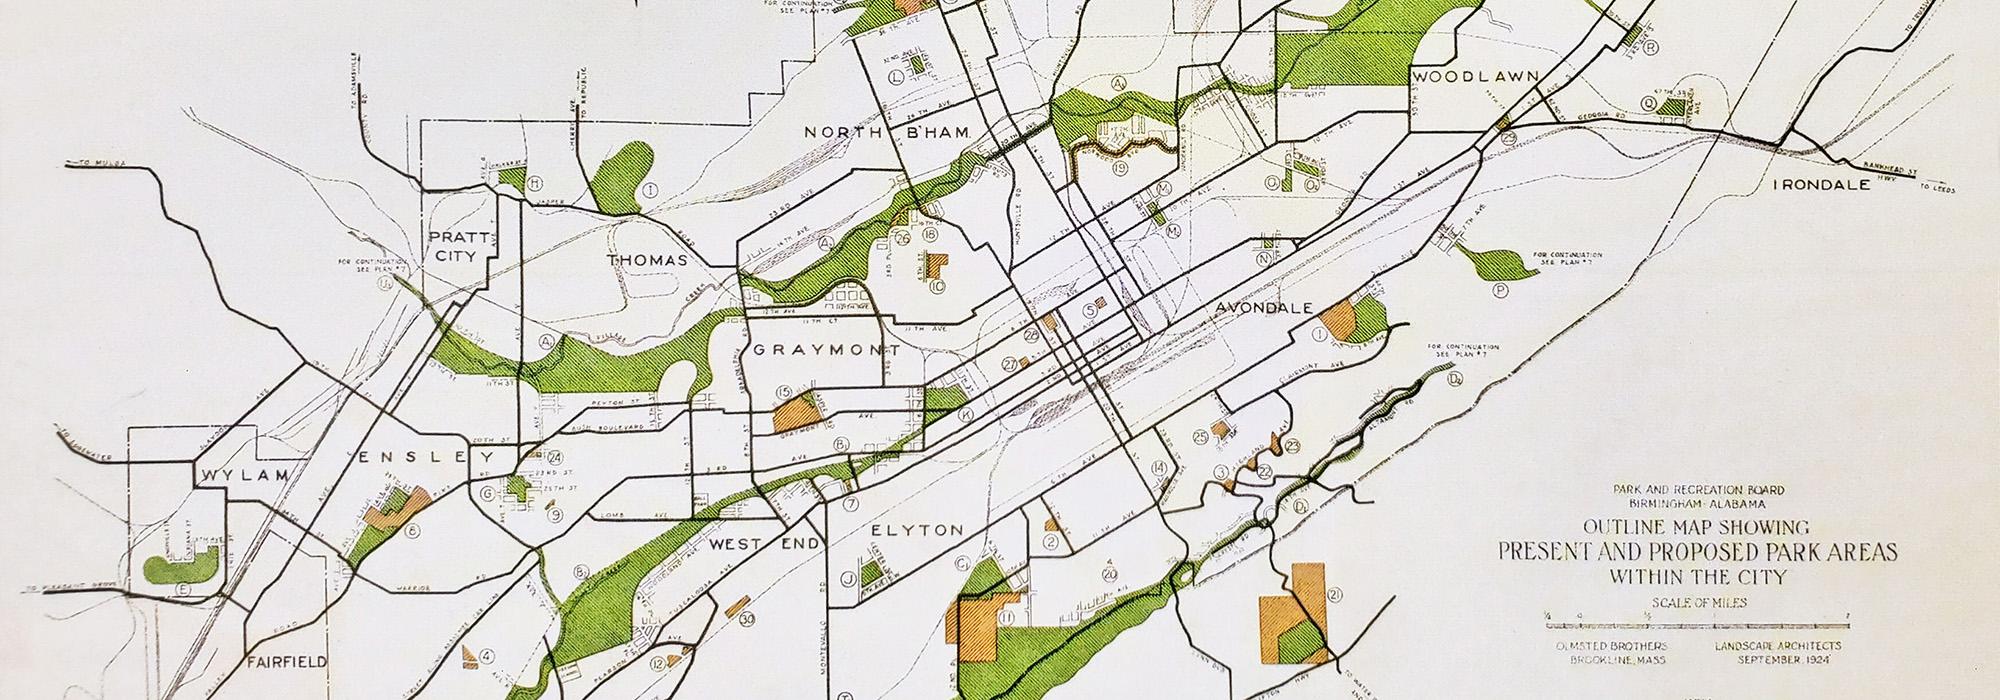 Present and proposed park areas within the city of Birmingham, 1924